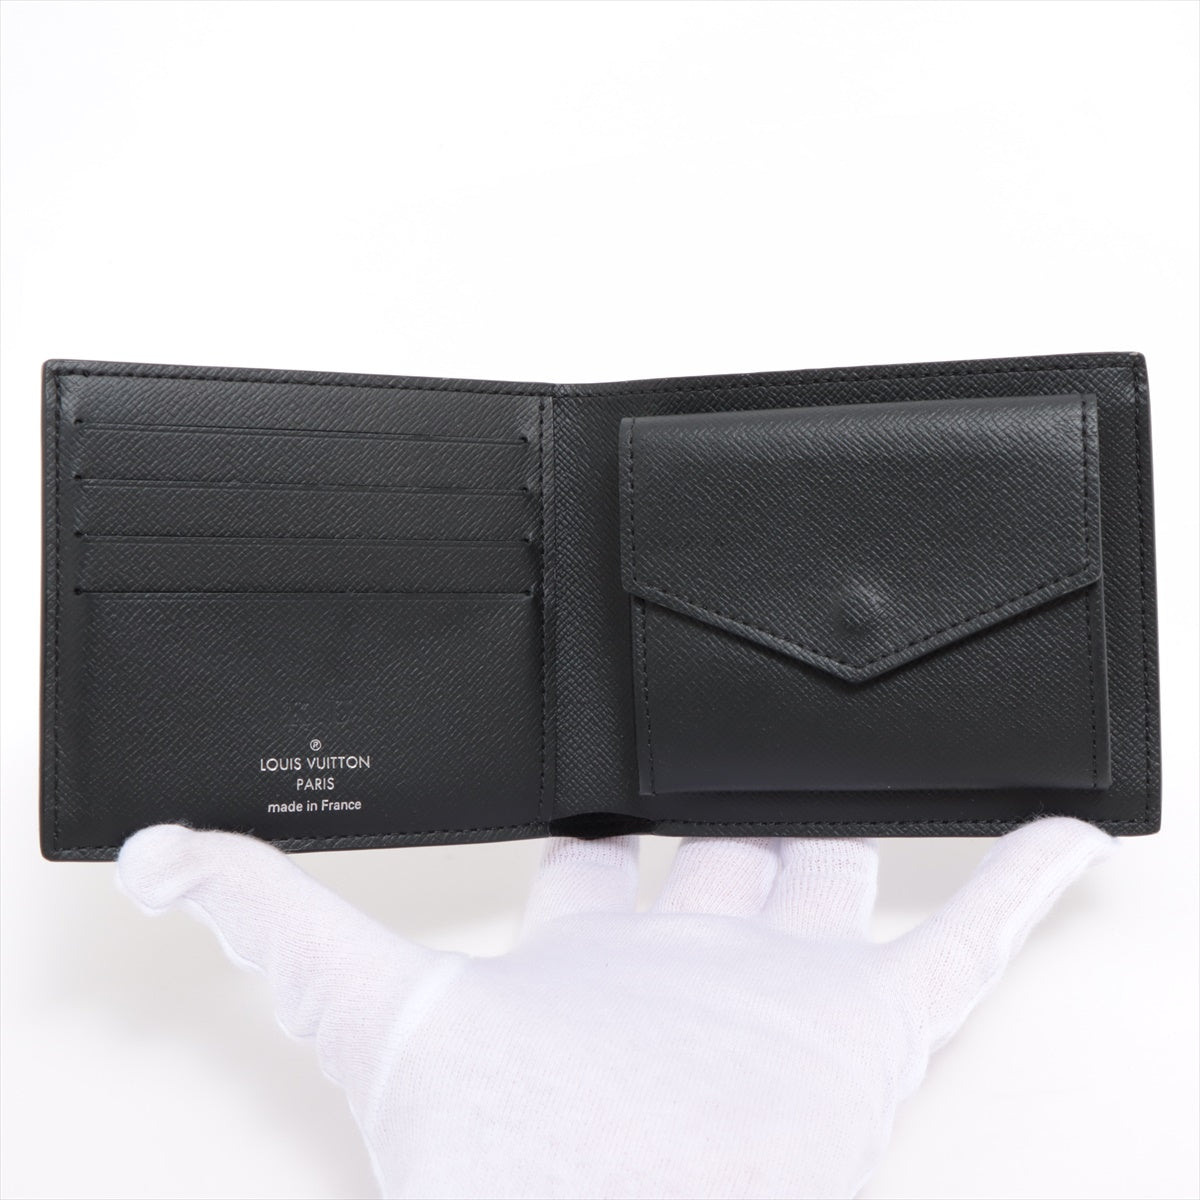 Louis Vuitton Monogram Eclipse Portefeuille Marco NM M62545 There was an RFID response